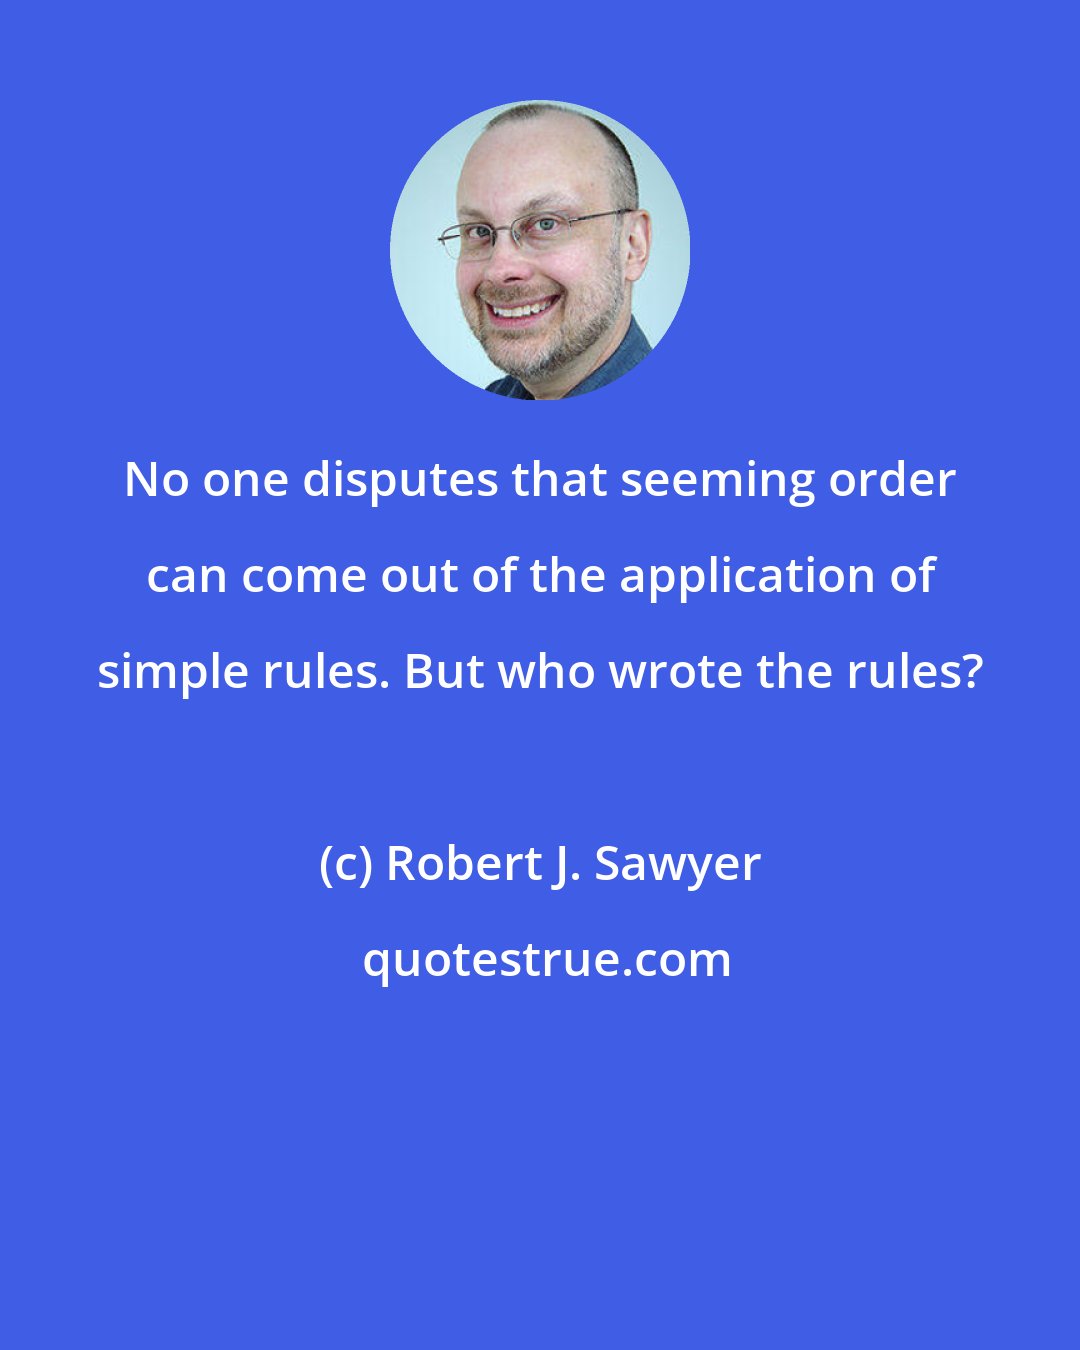 Robert J. Sawyer: No one disputes that seeming order can come out of the application of simple rules. But who wrote the rules?